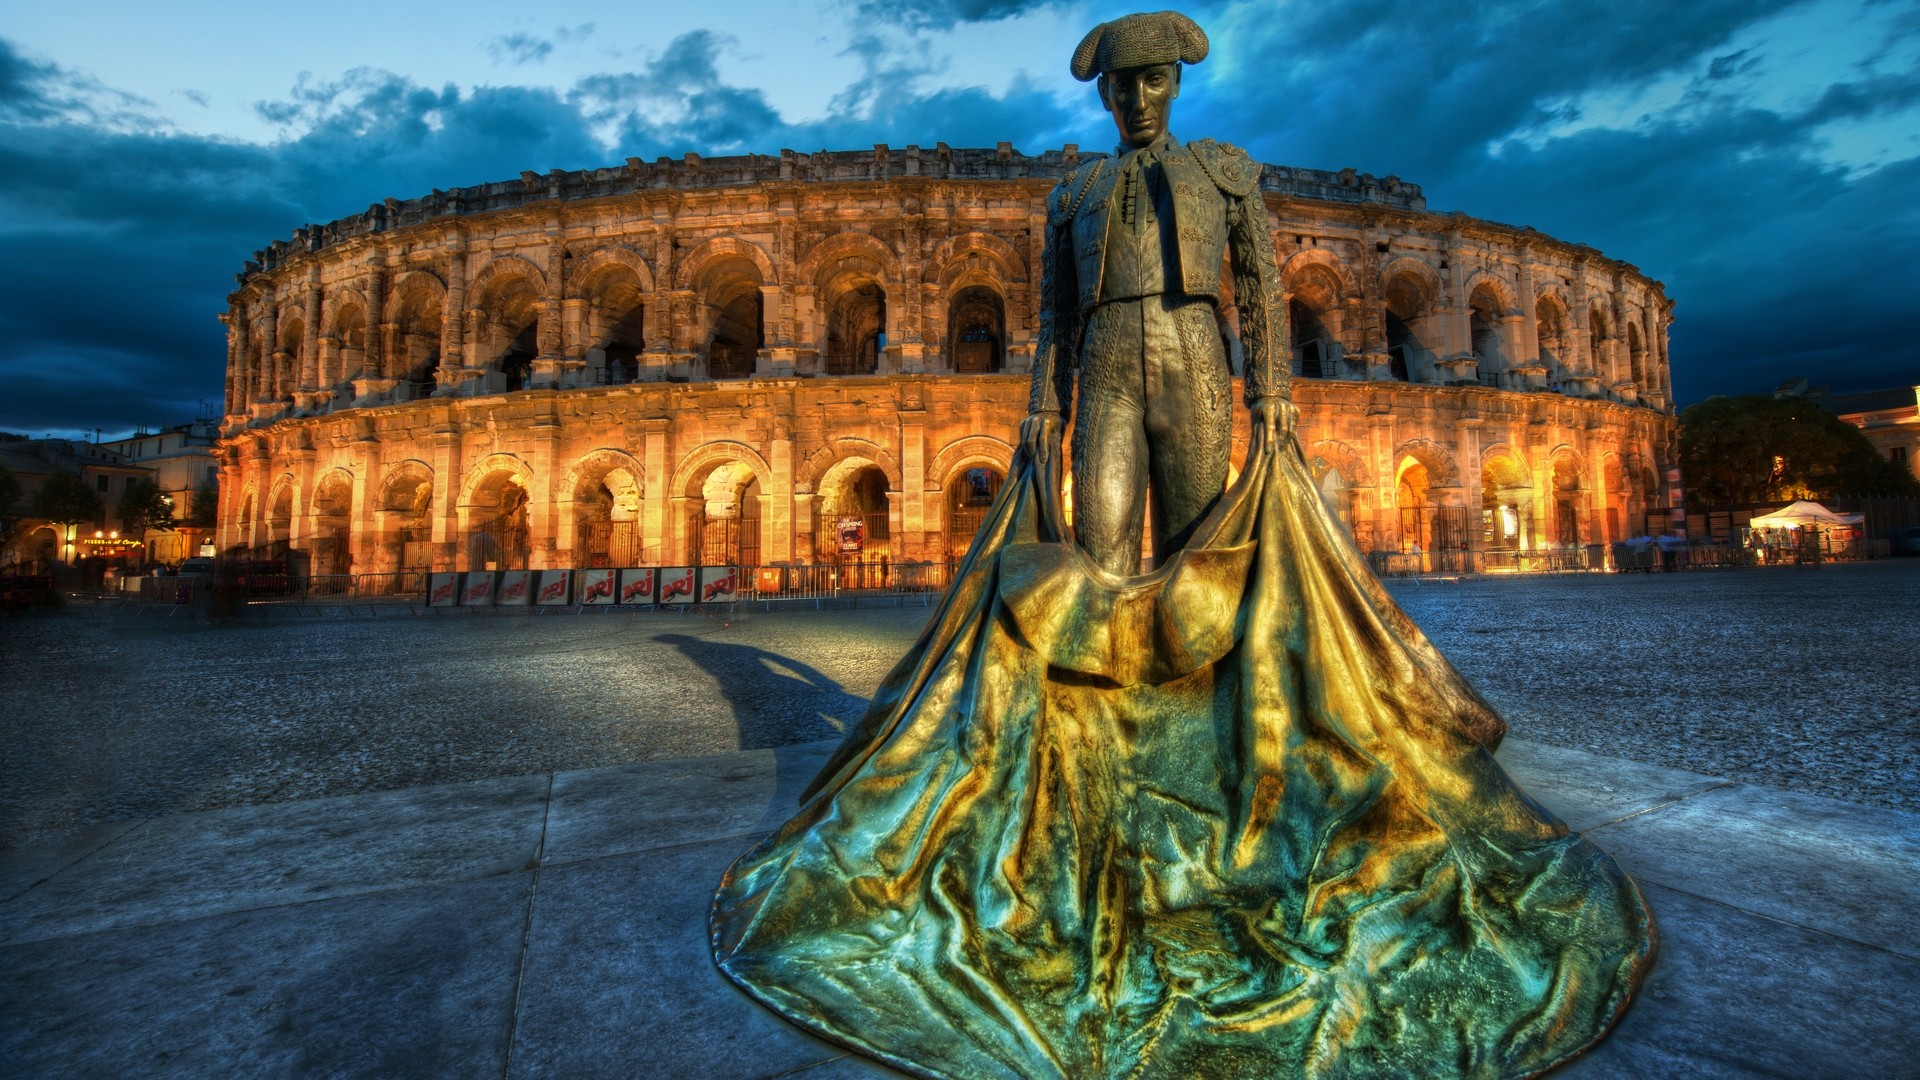 General 1920x1080 HDR statue architecture lights Colosseum Rome Italy landmark World Heritage Site Europe